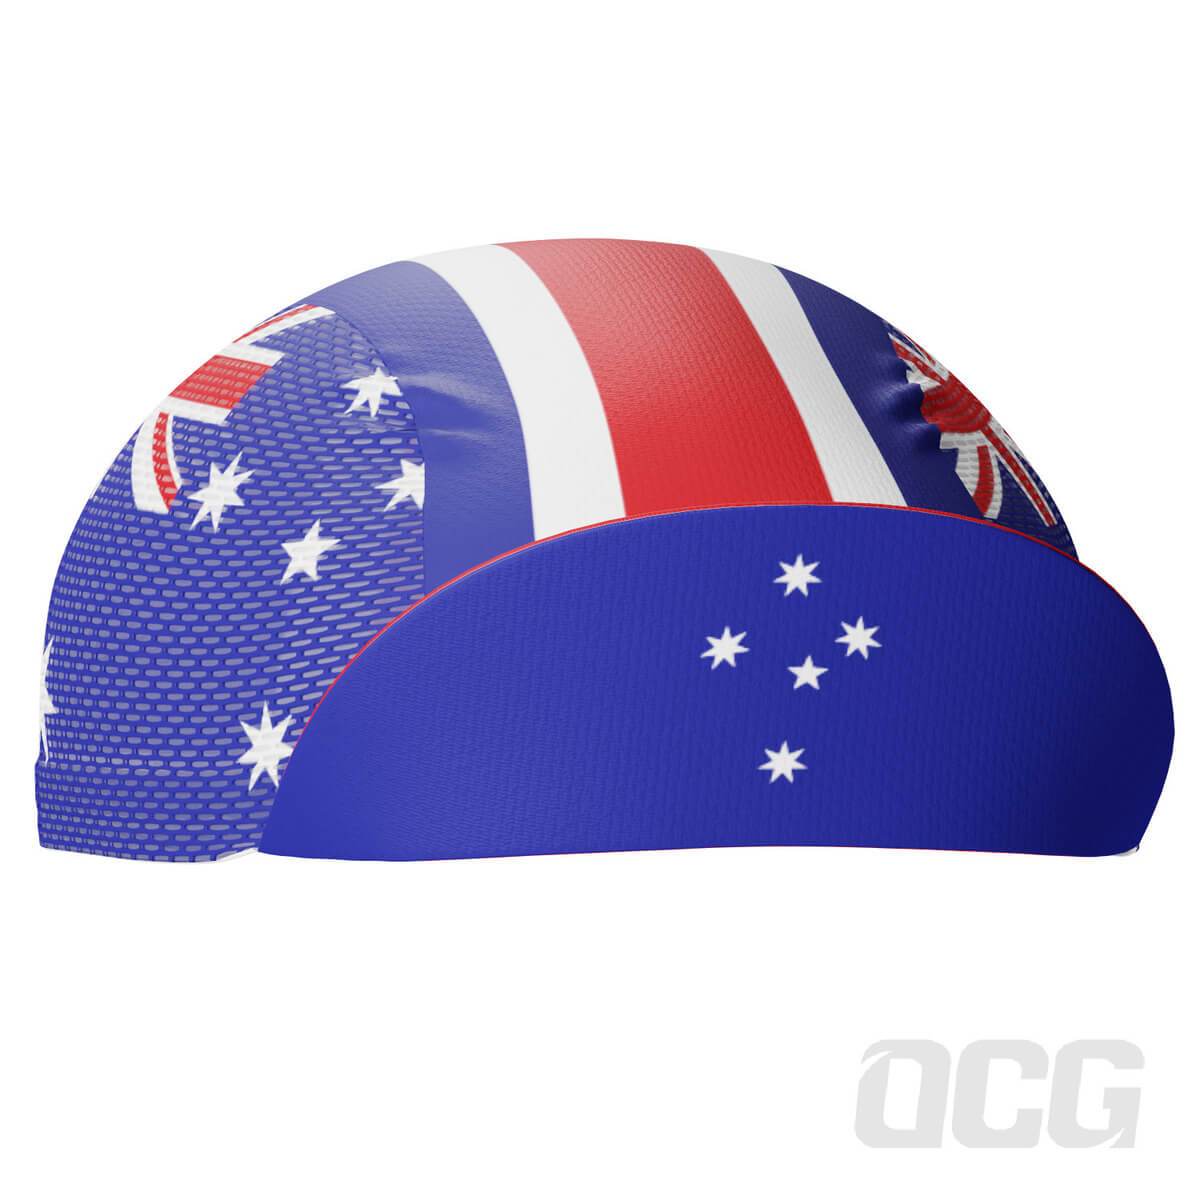 Unisex Australia Southern Cross National Icon Quick Dry Cycling Cap